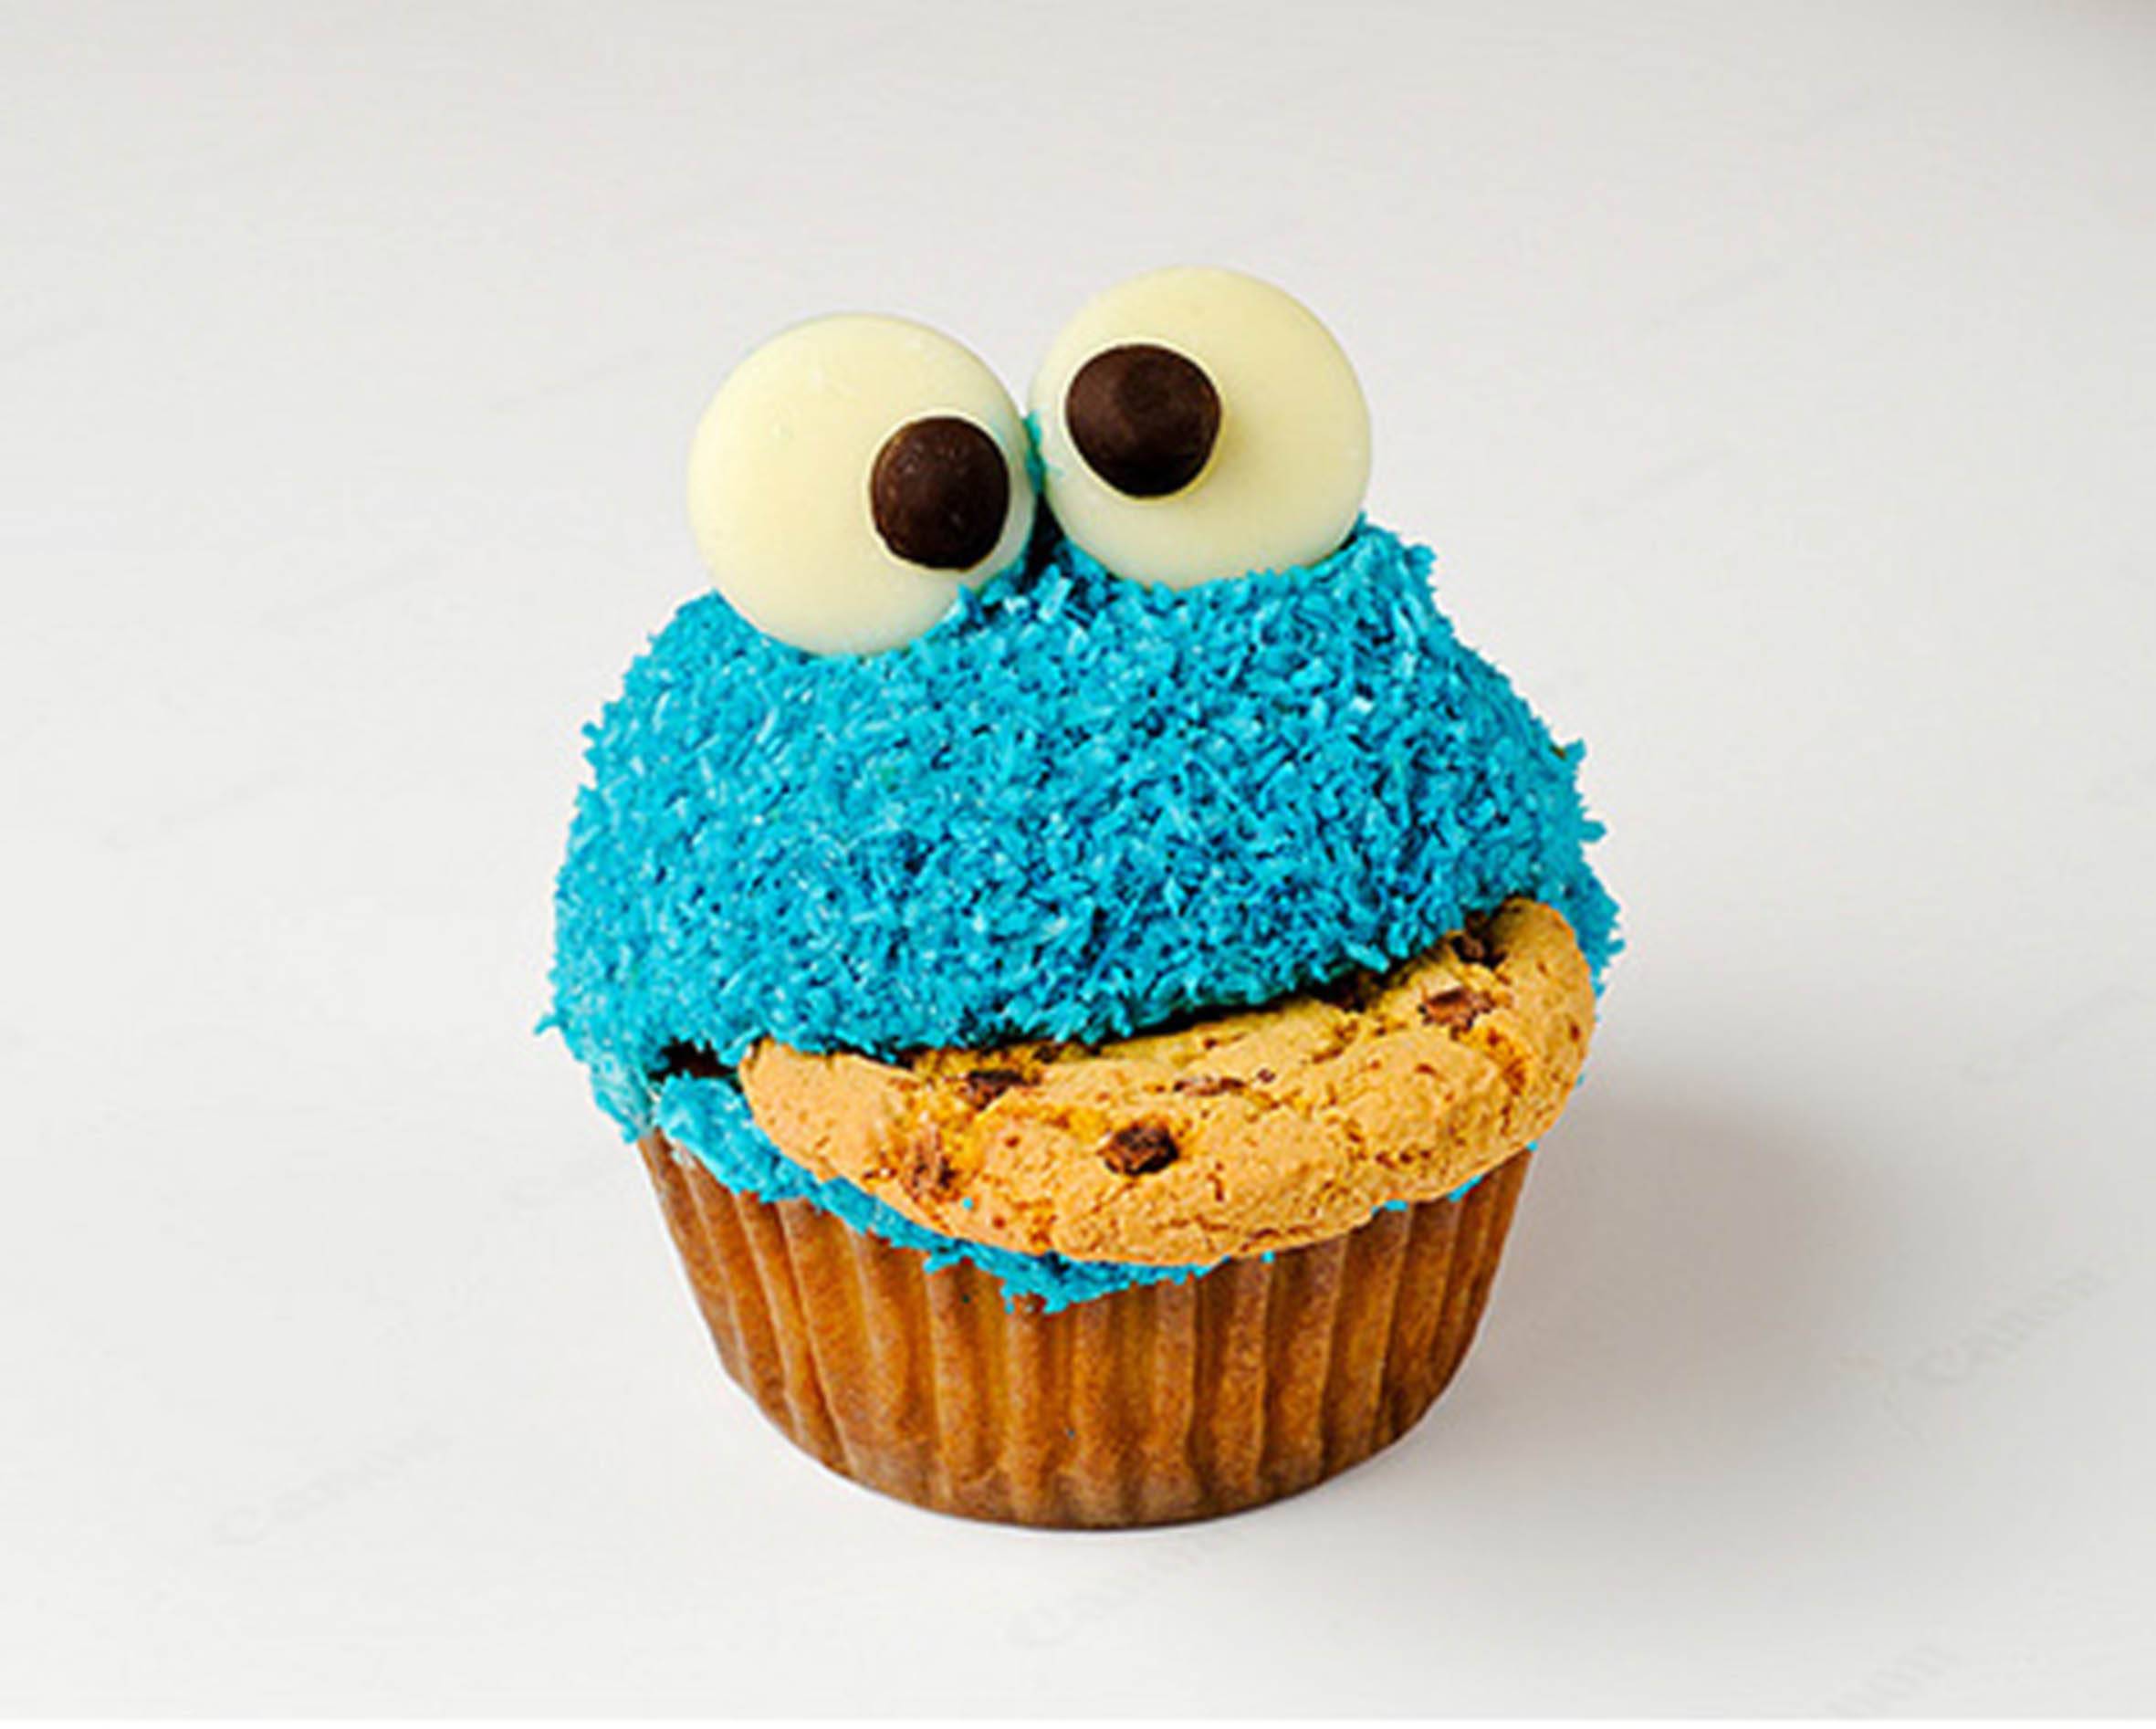 Cookie monster wallpaper - (#5520) - High Quality and Resolution ...